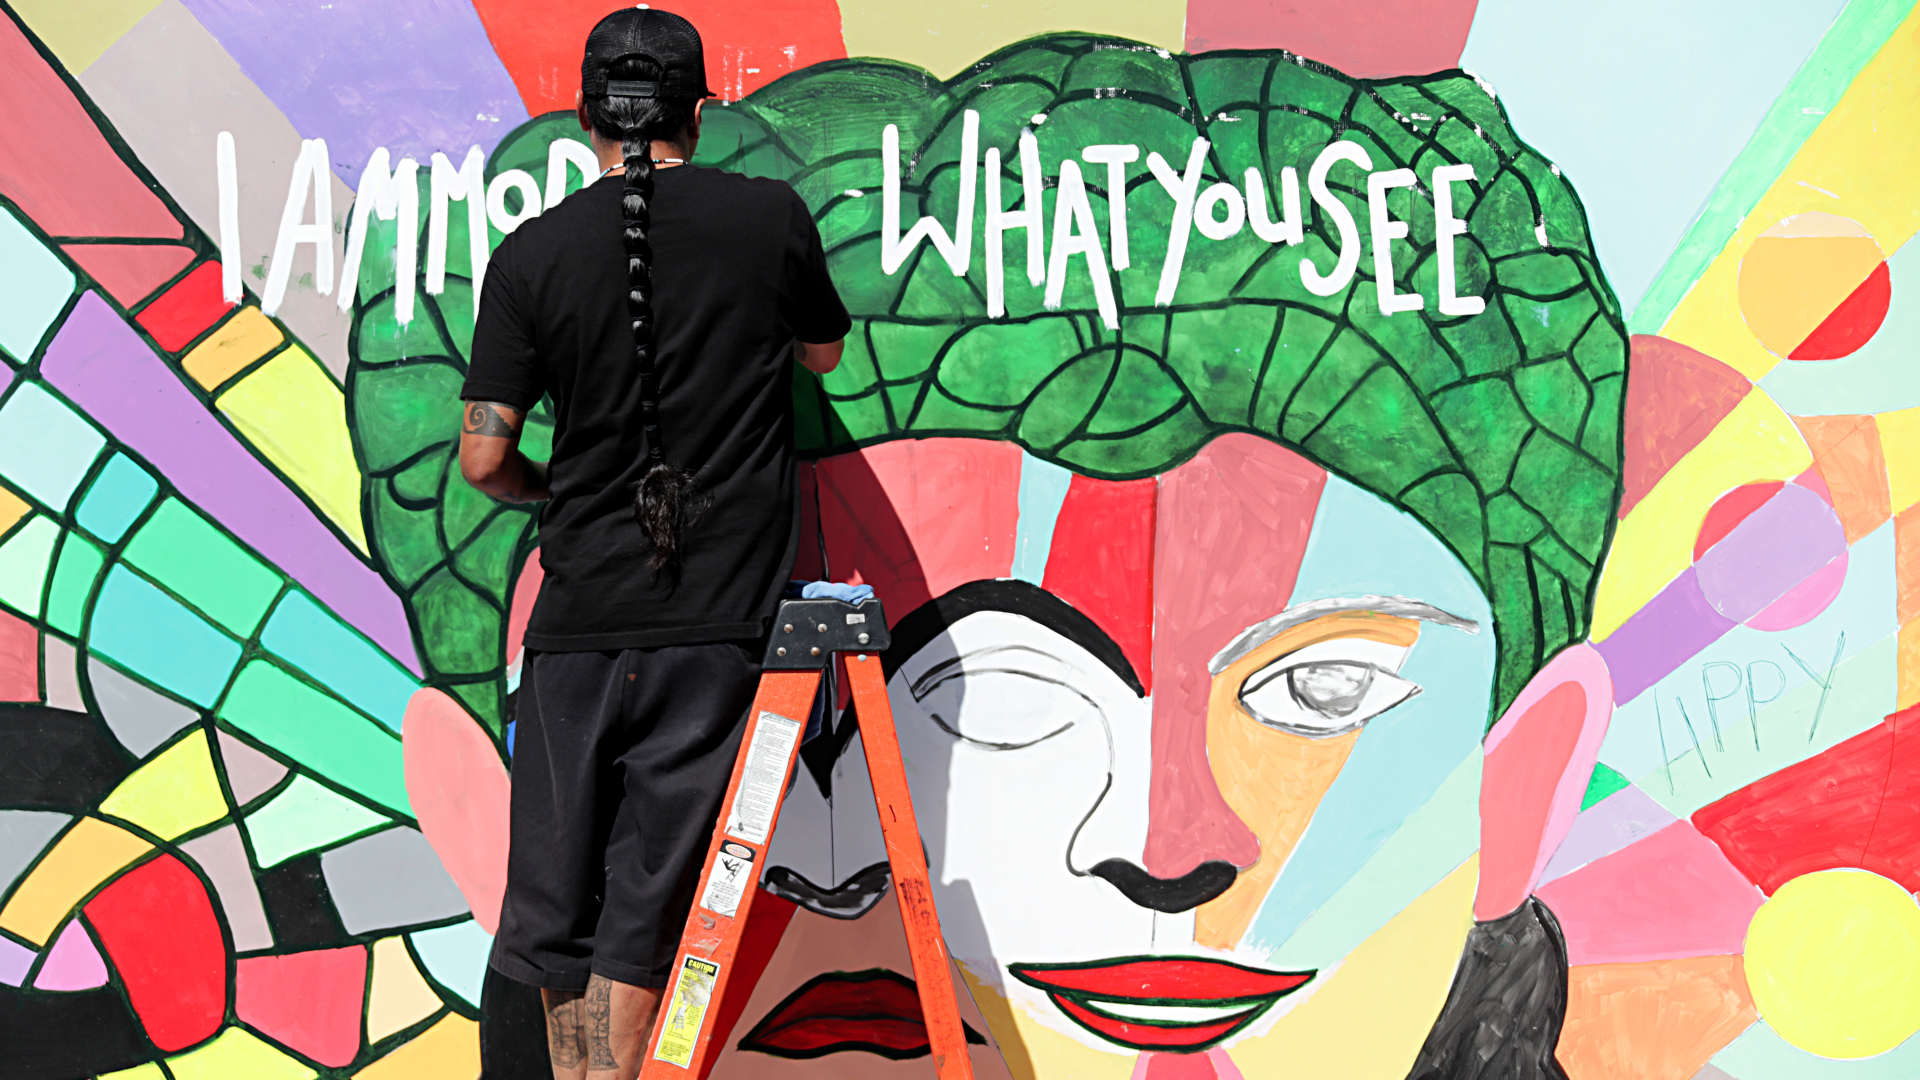 In San Diego, a mural project aimed at reducing mental illness stigma was launched by the National Alliance on Mental Illness and Neurocrine Biosciences in 2019.